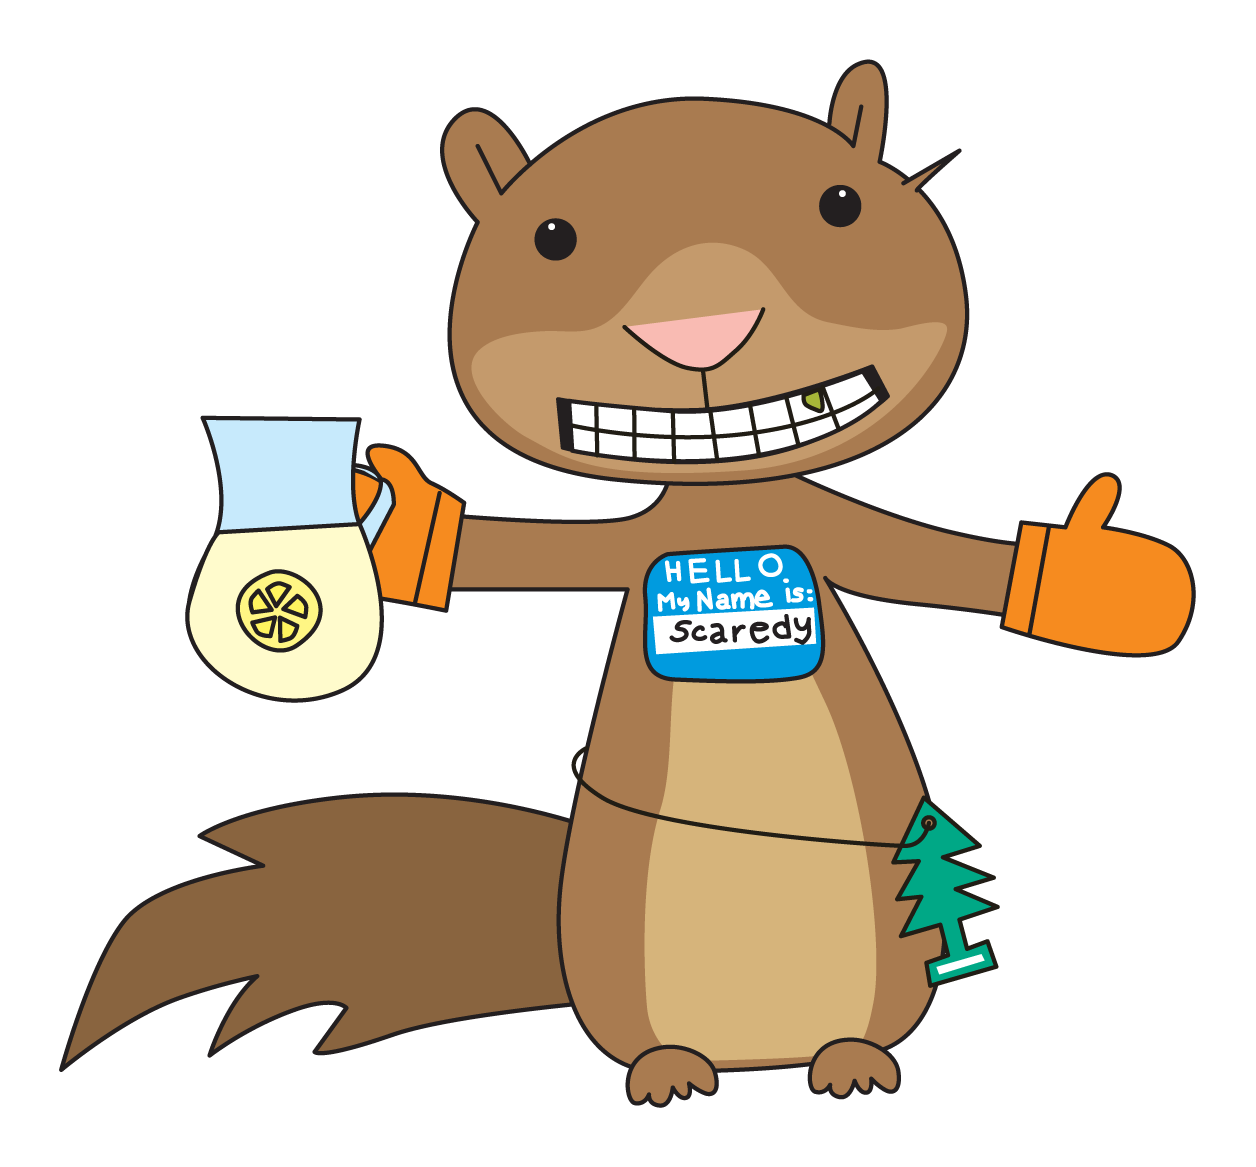 Ripper reading resources rigorous. Clipart squirrel thinking